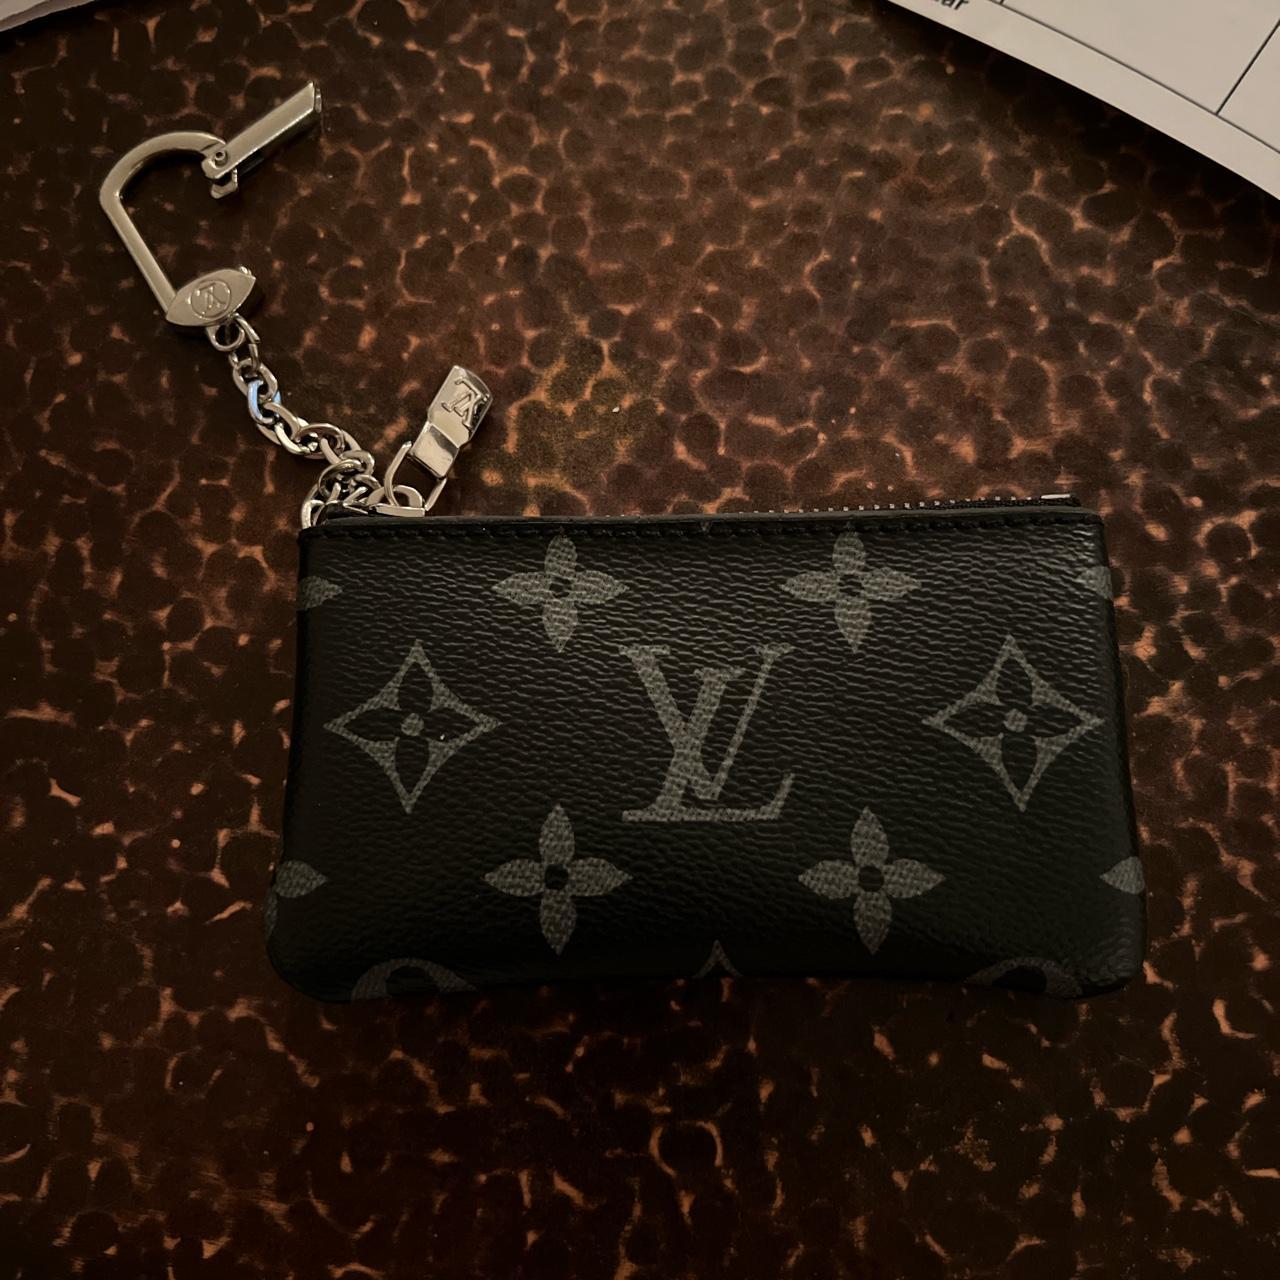 REAL Louis Vuitton keychain wallet In great condition - Depop